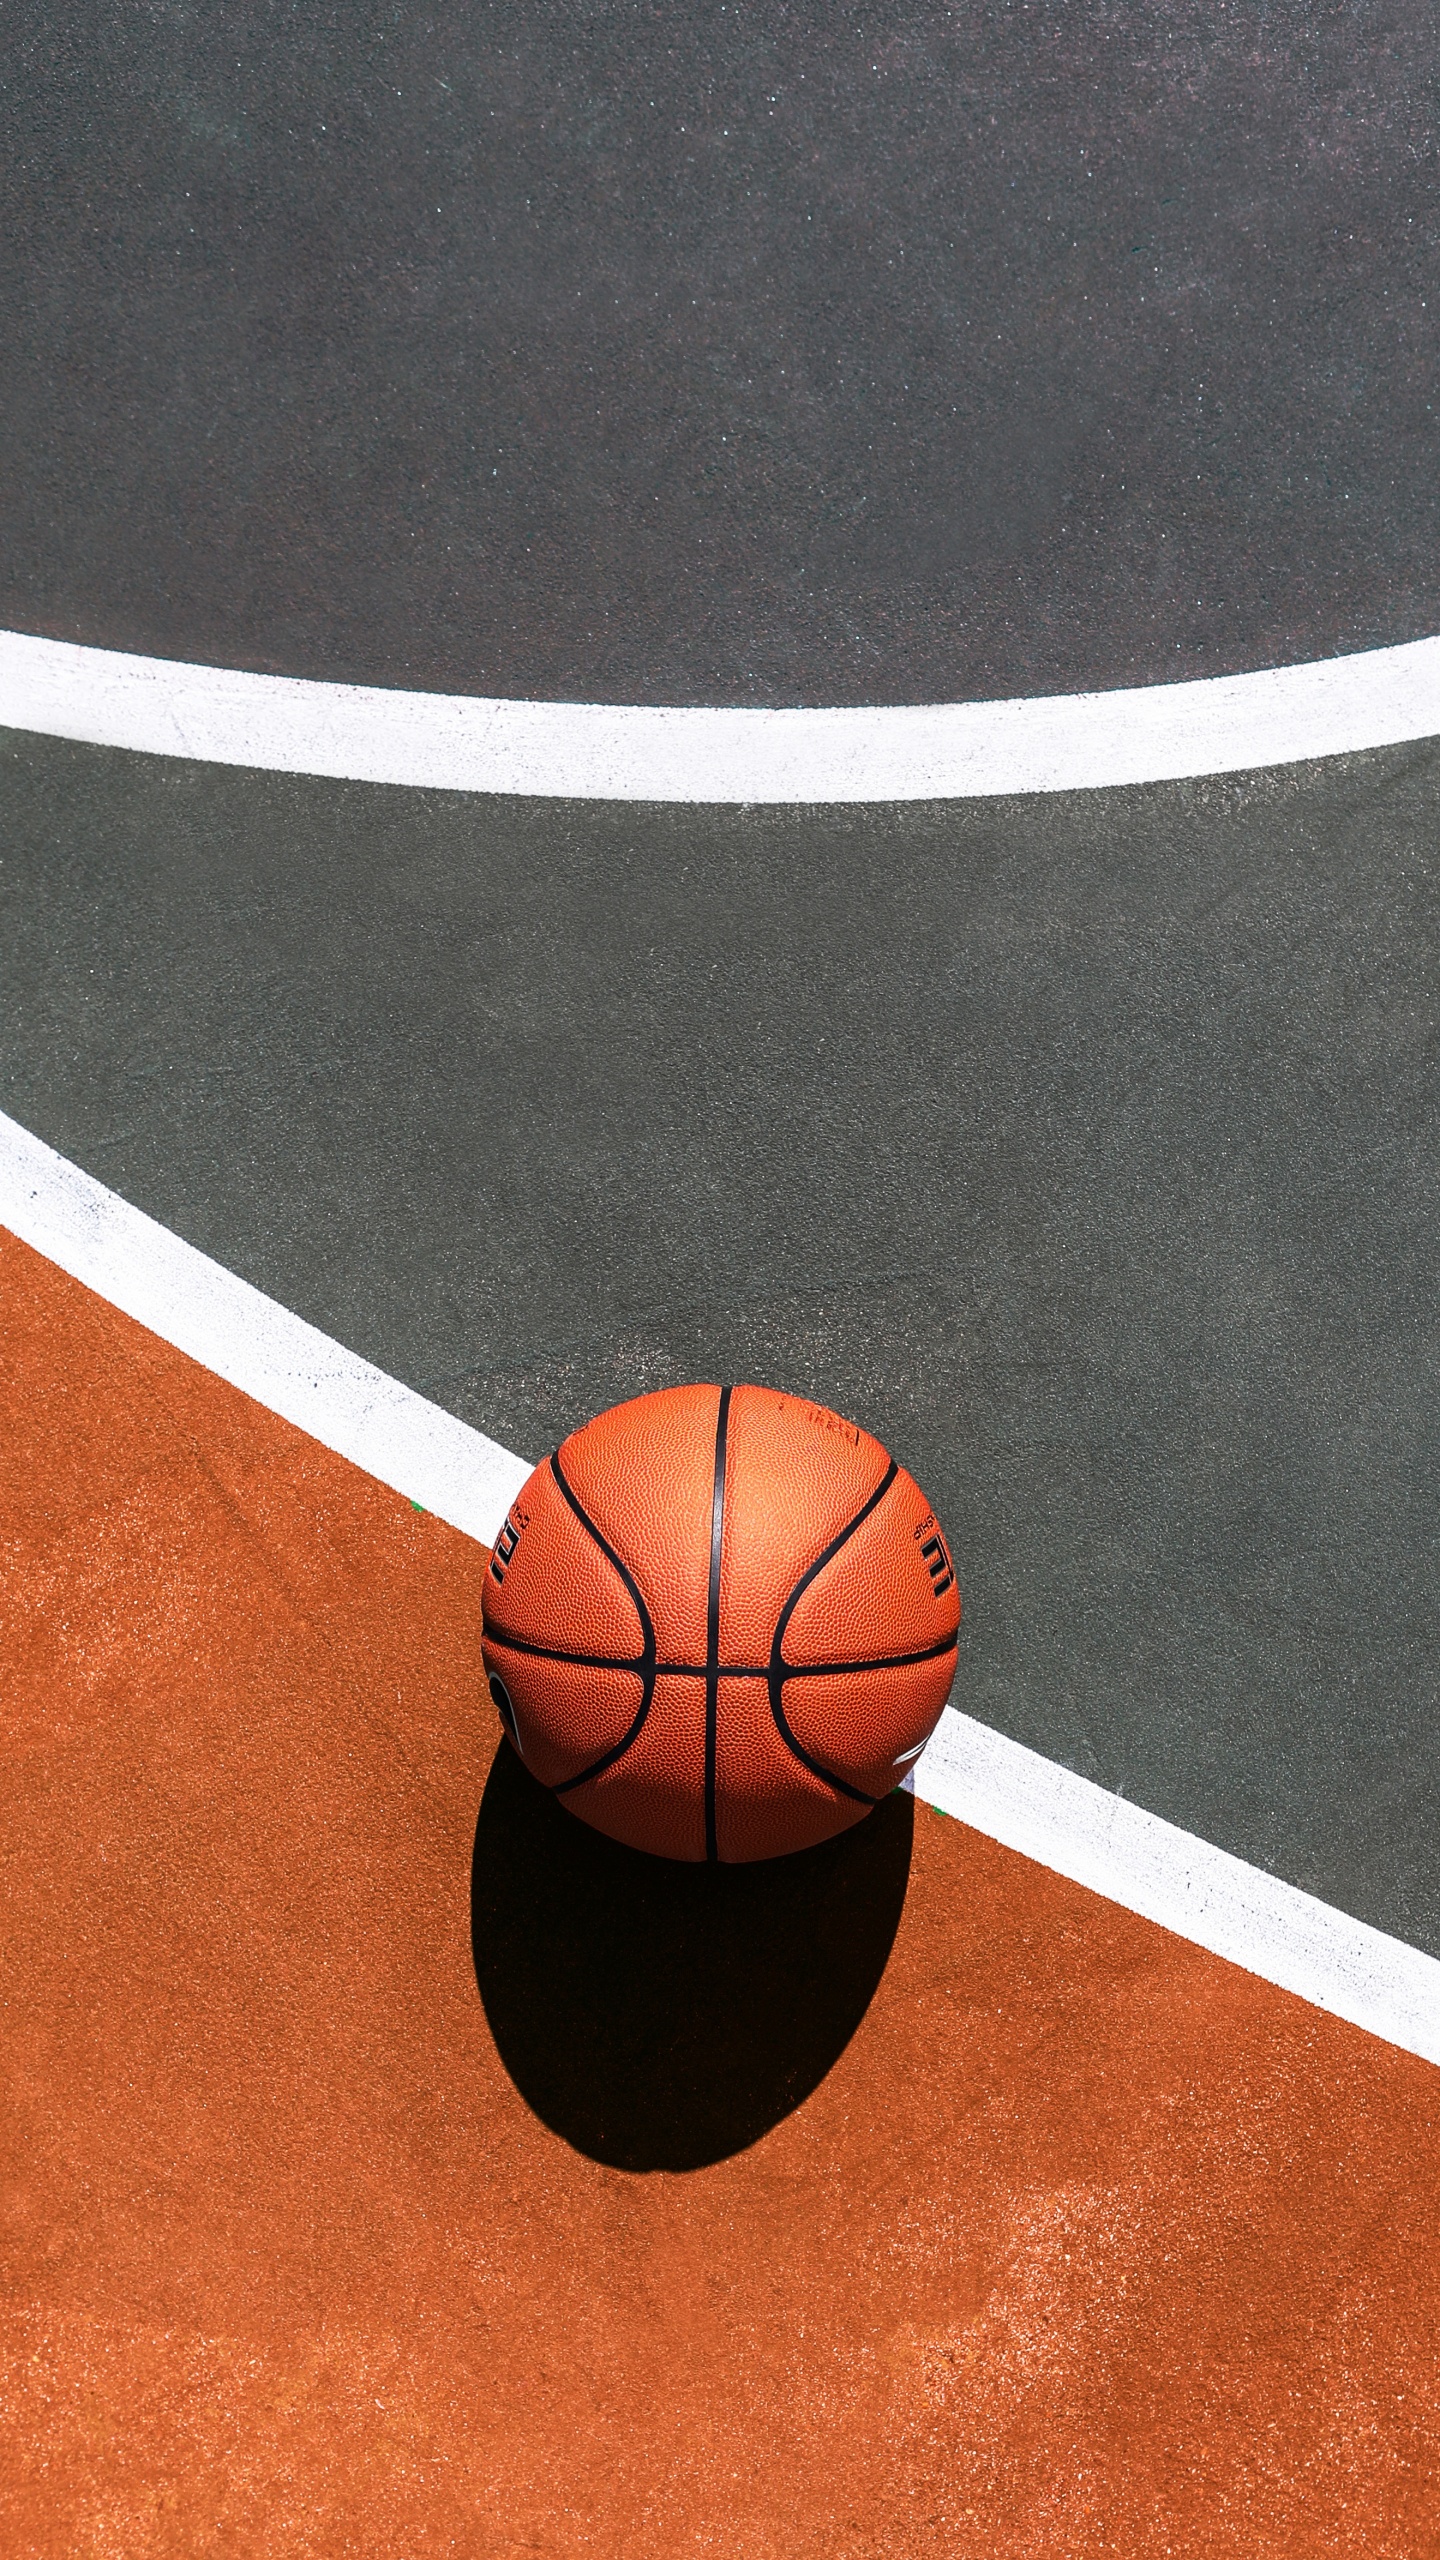 Basketball on Blue and White Basketball Court. Wallpaper in 1440x2560 Resolution